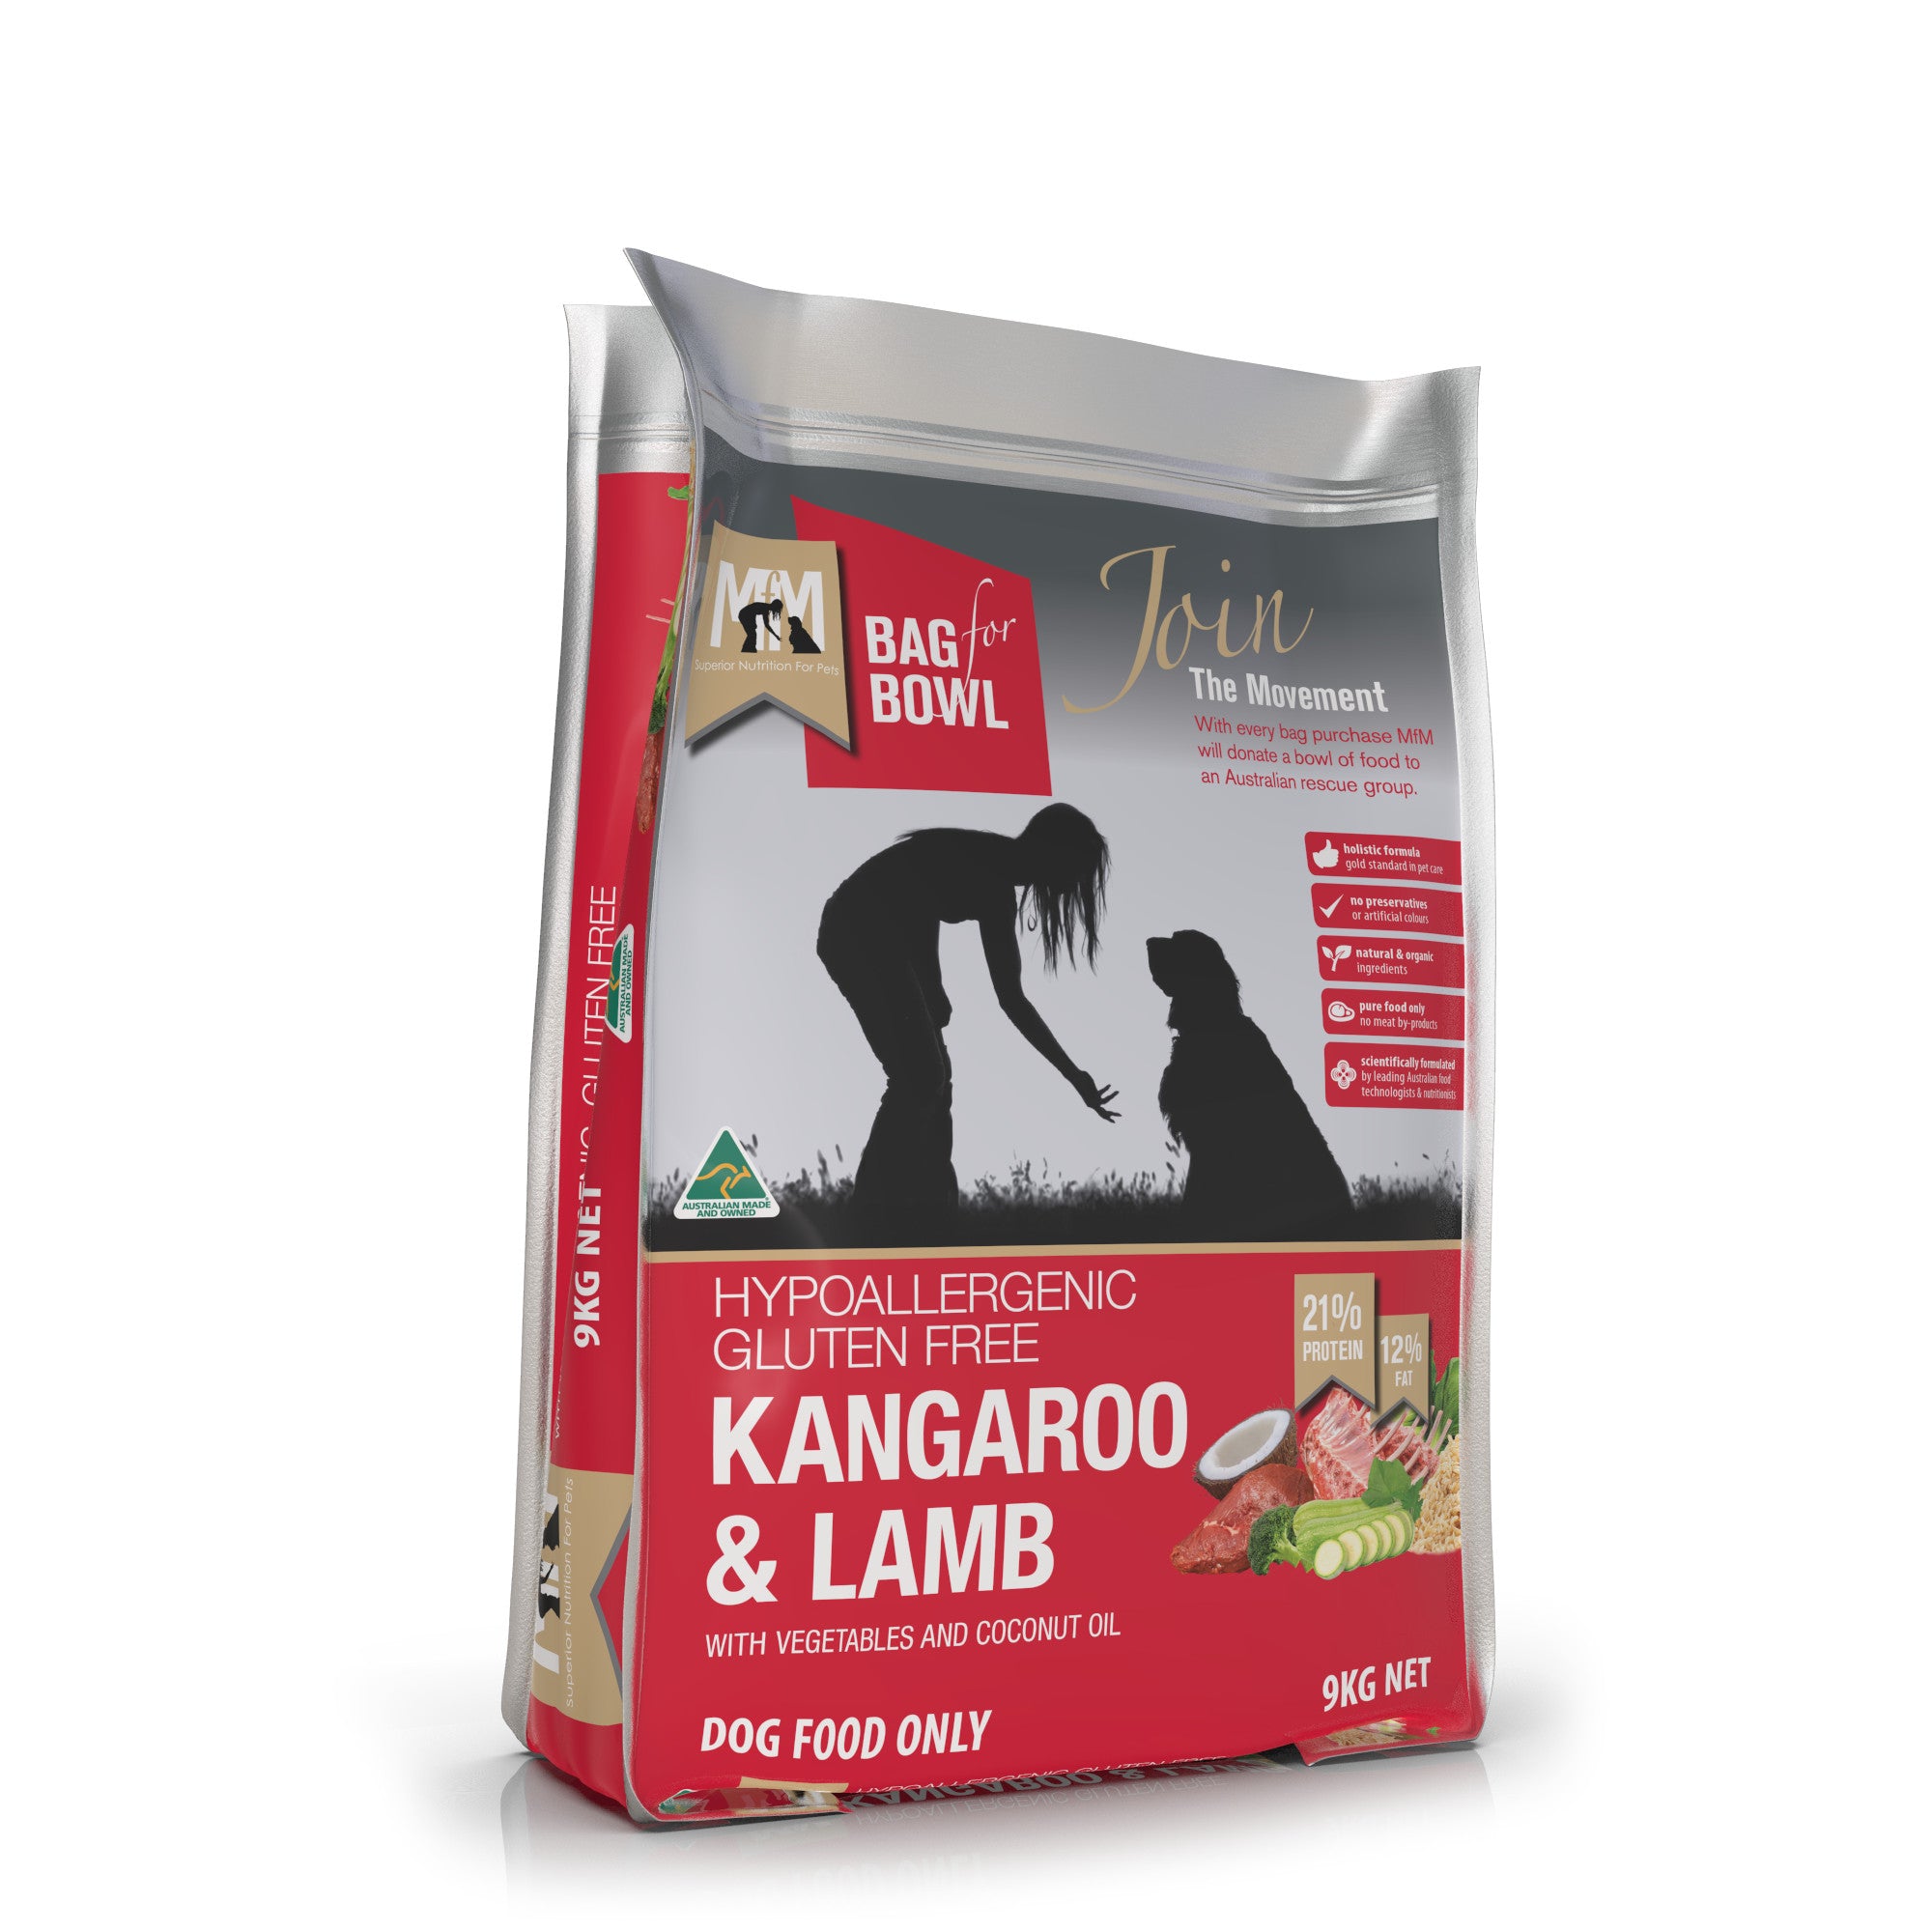 Meals for Mutts Kangaroo and Lamb Dog Food 9kg.